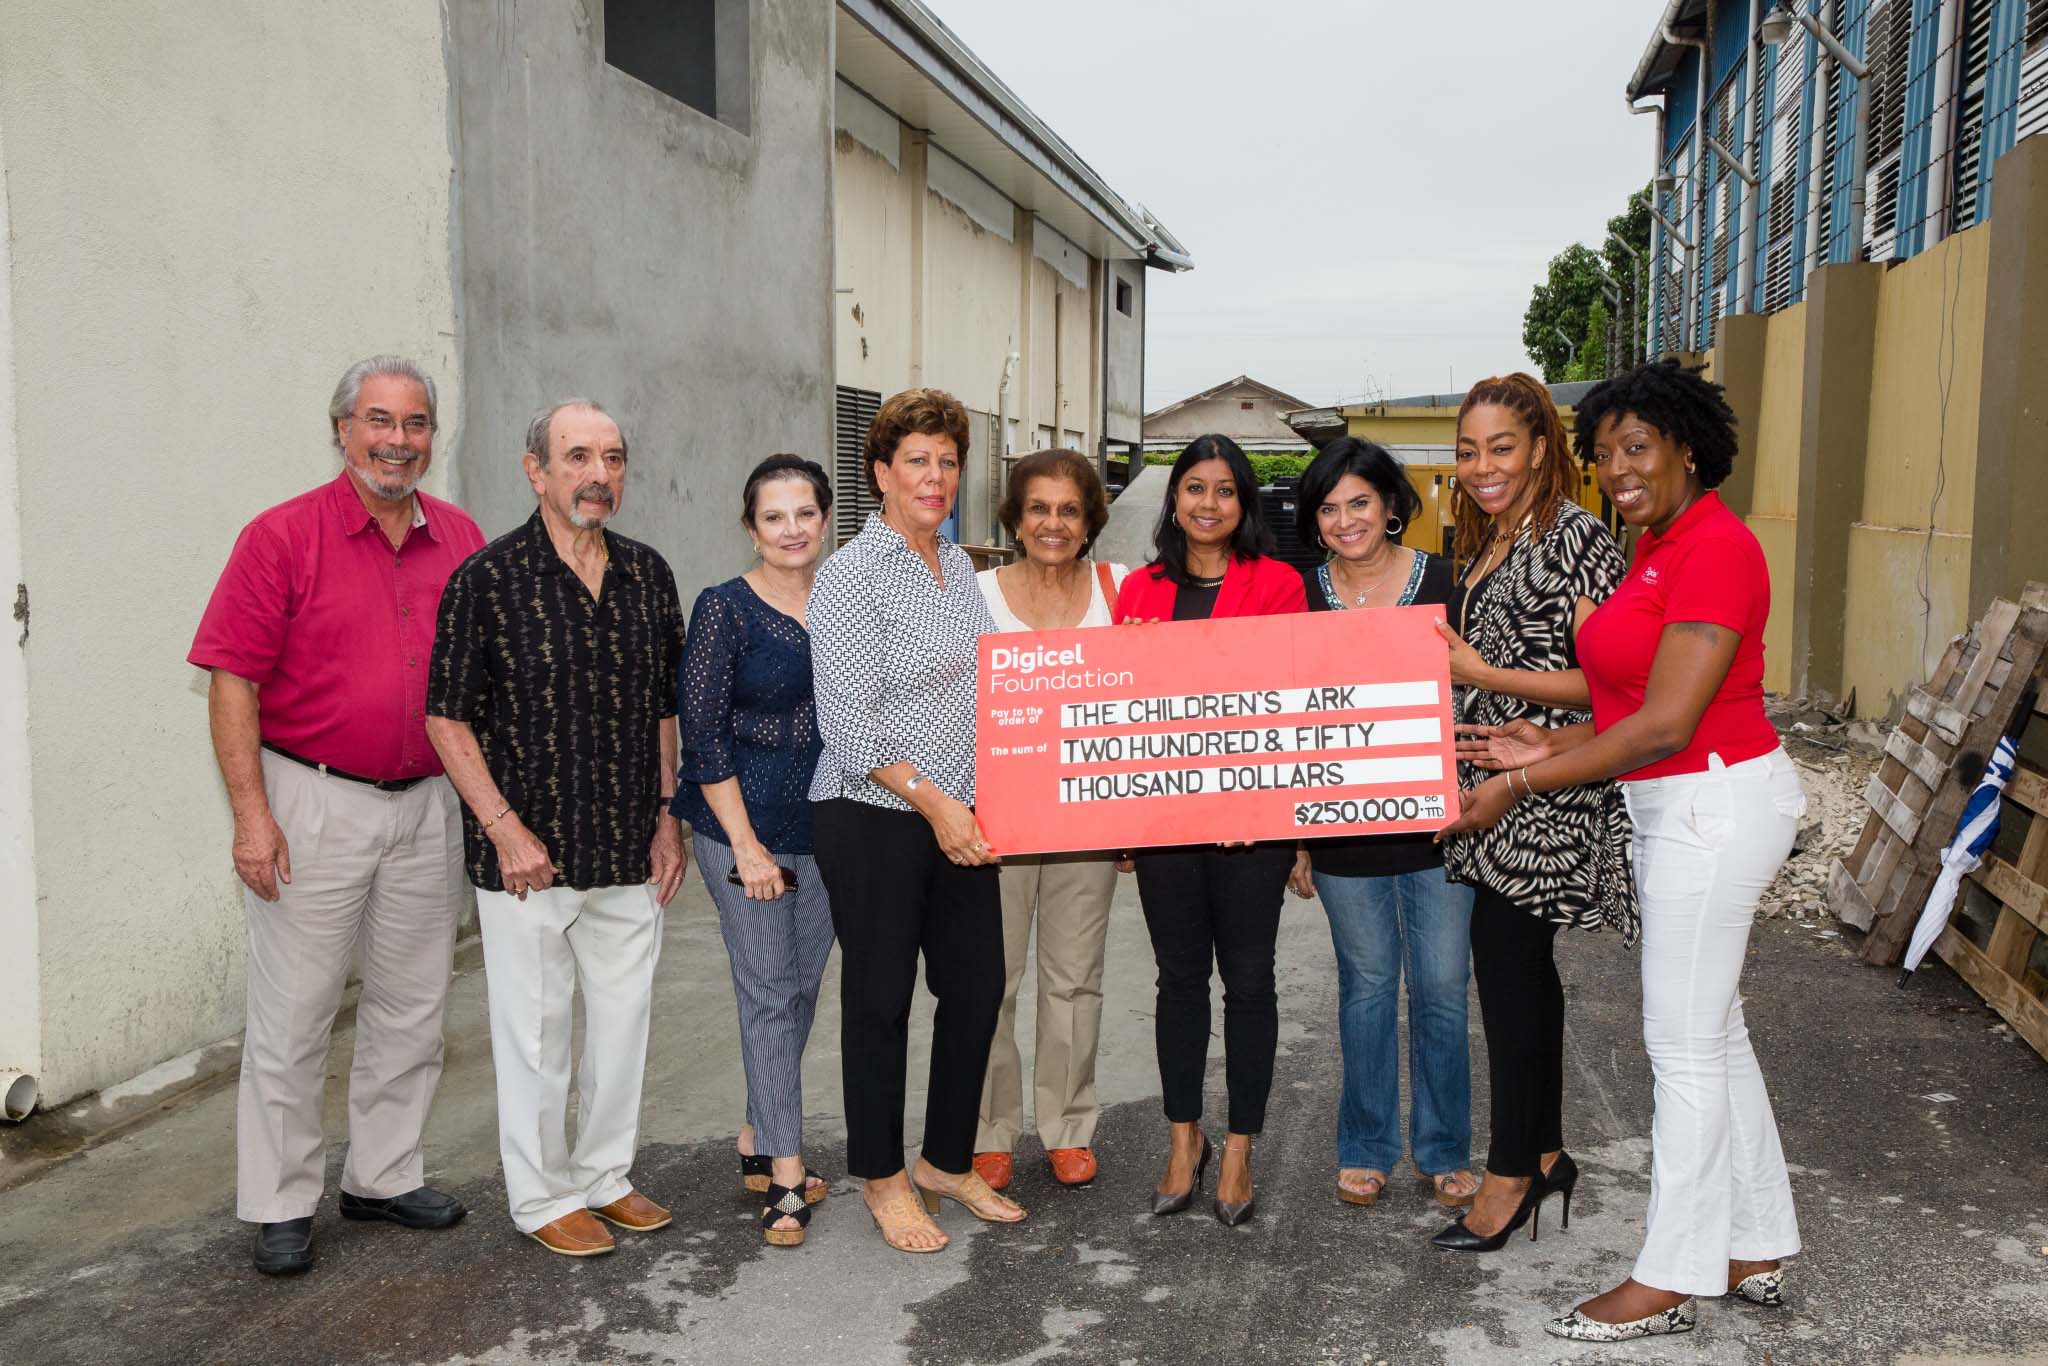 Digicel Trinidad and Tobago Foundation donates to The Children’s Ark to assist with renovations to the Princess Elizabeth Home